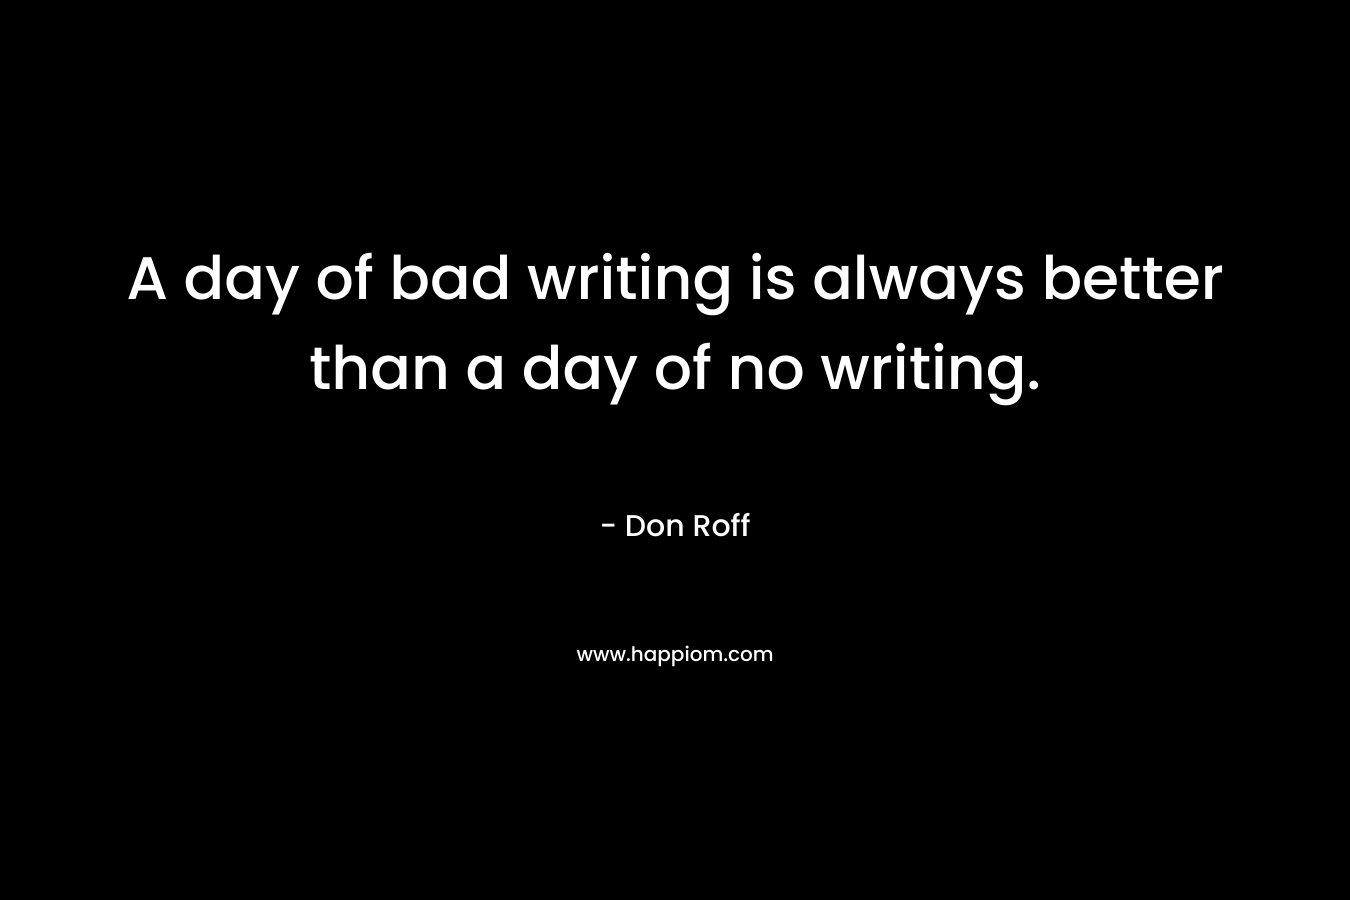 A day of bad writing is always better than a day of no writing. – Don Roff